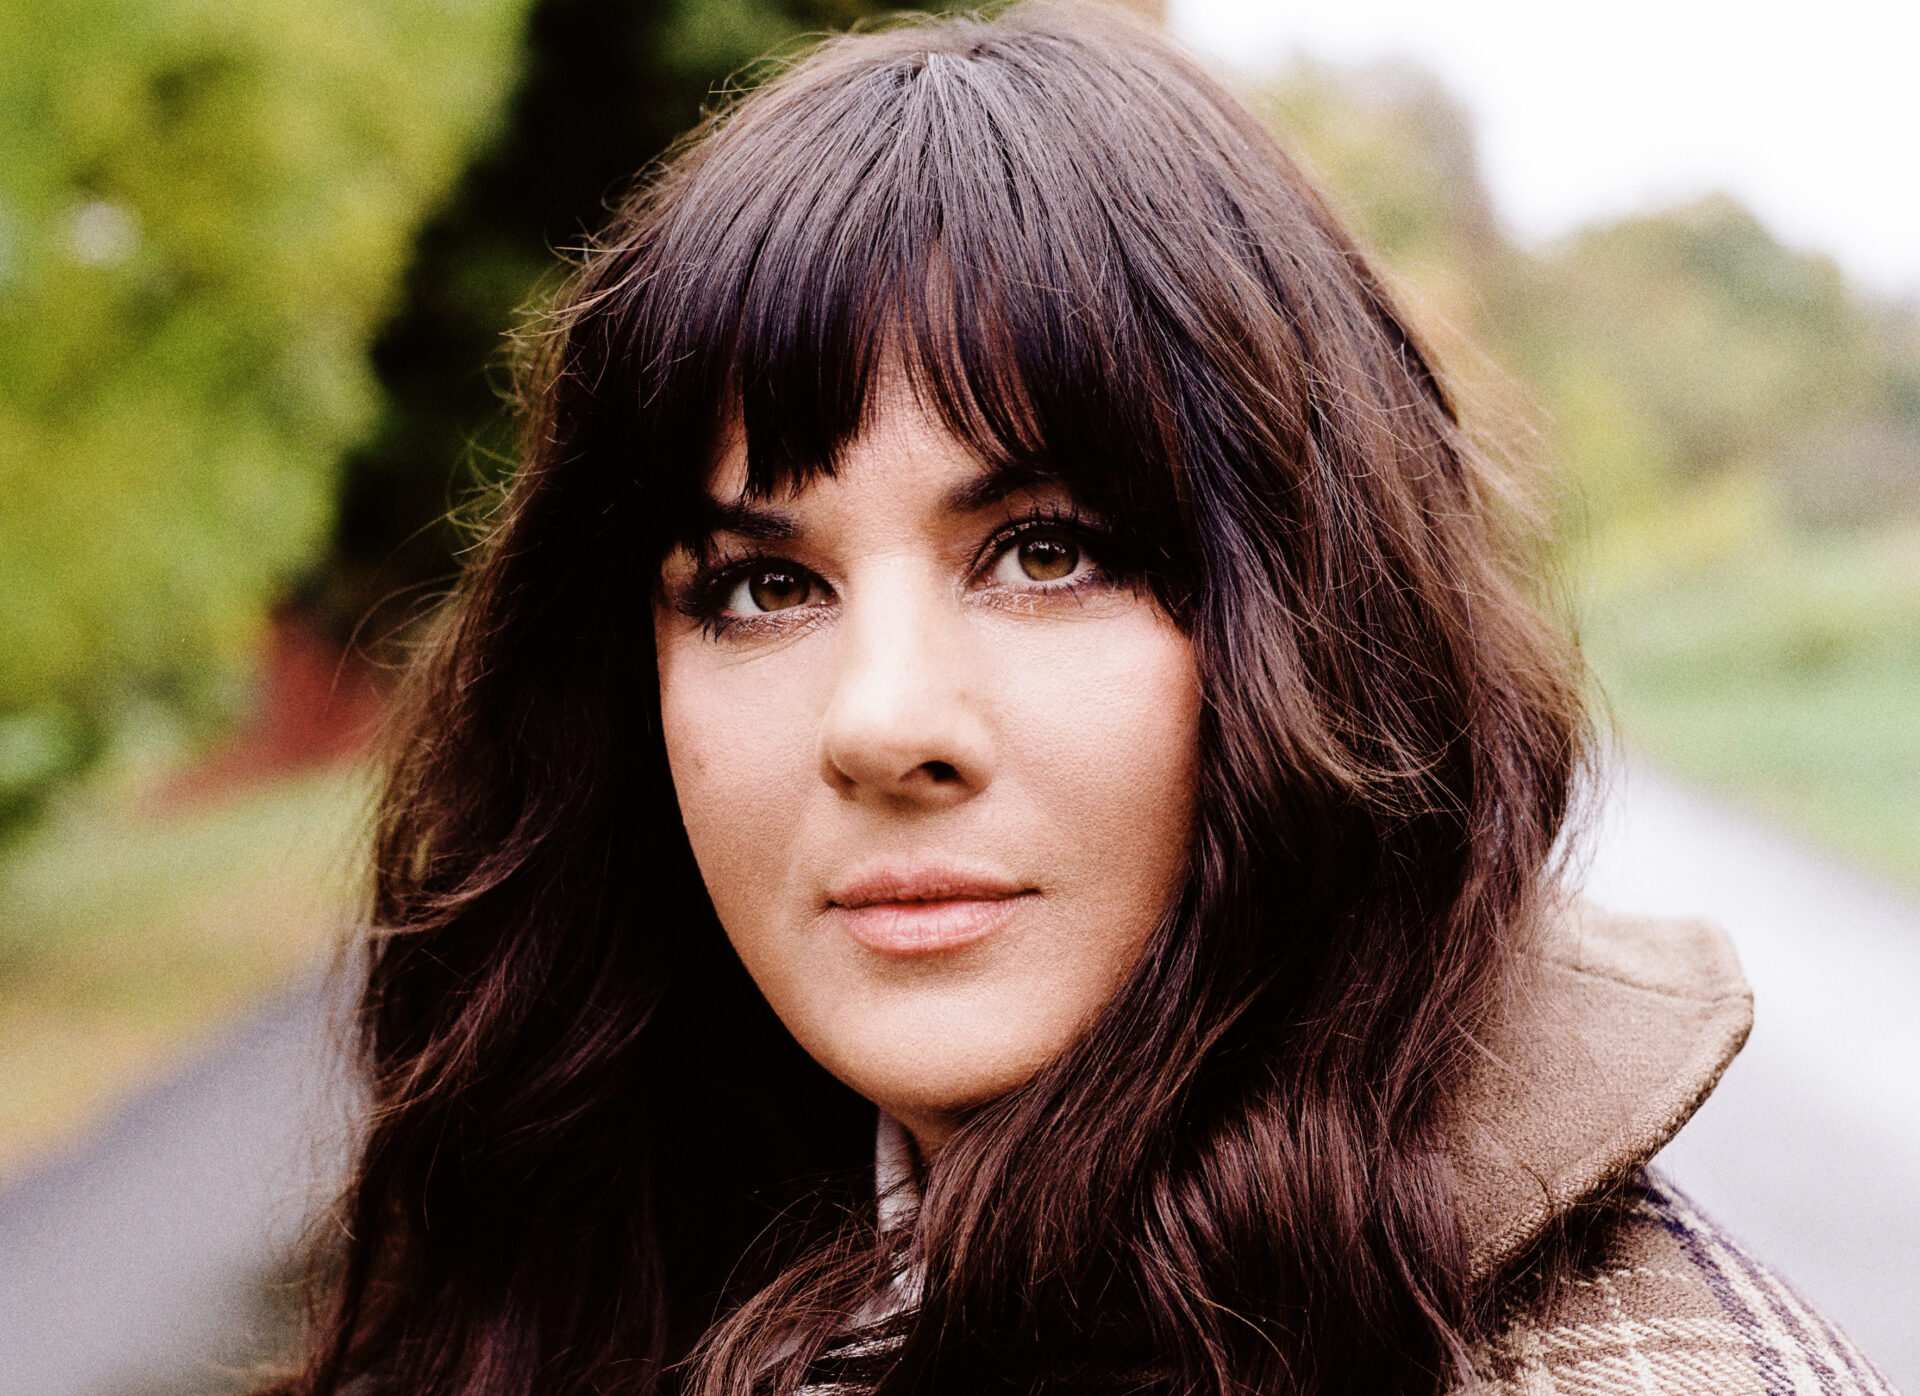 NEWS: Rumer is playing her first show in two years in October